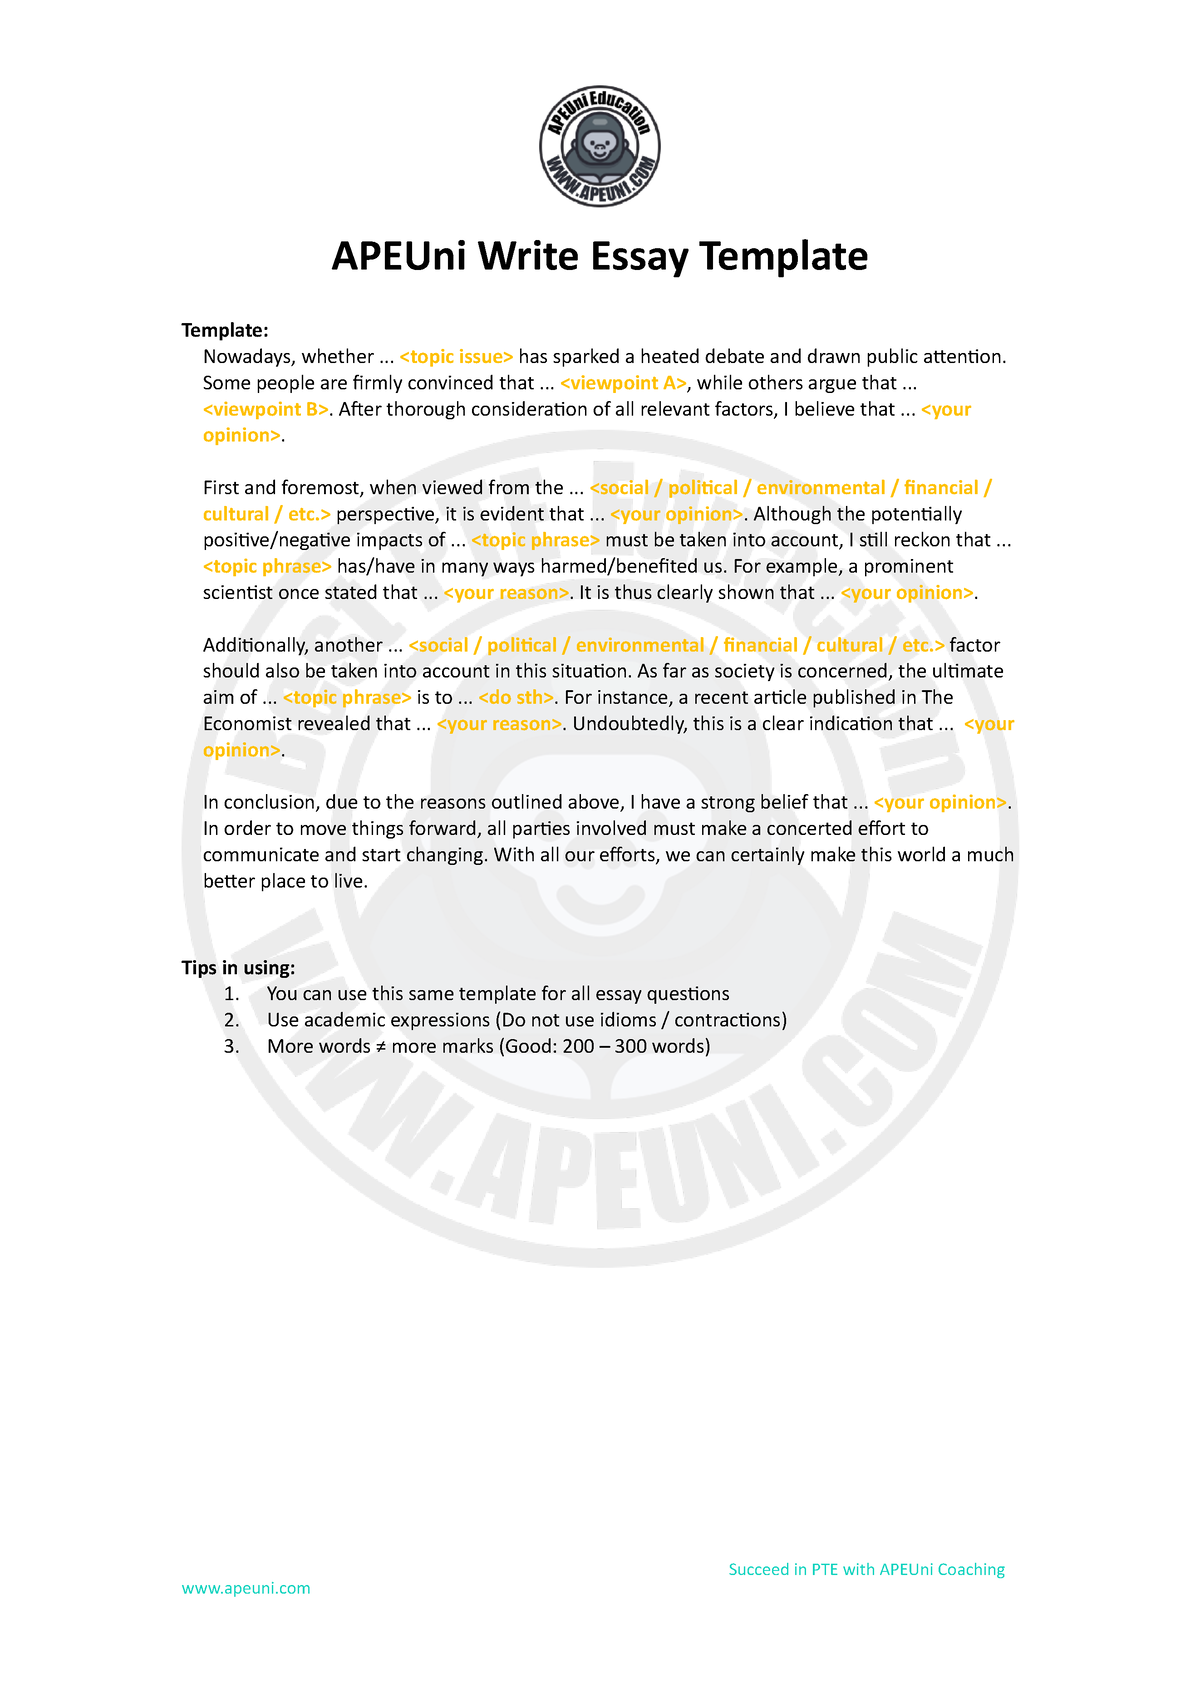 pte writing essay template for 65 score